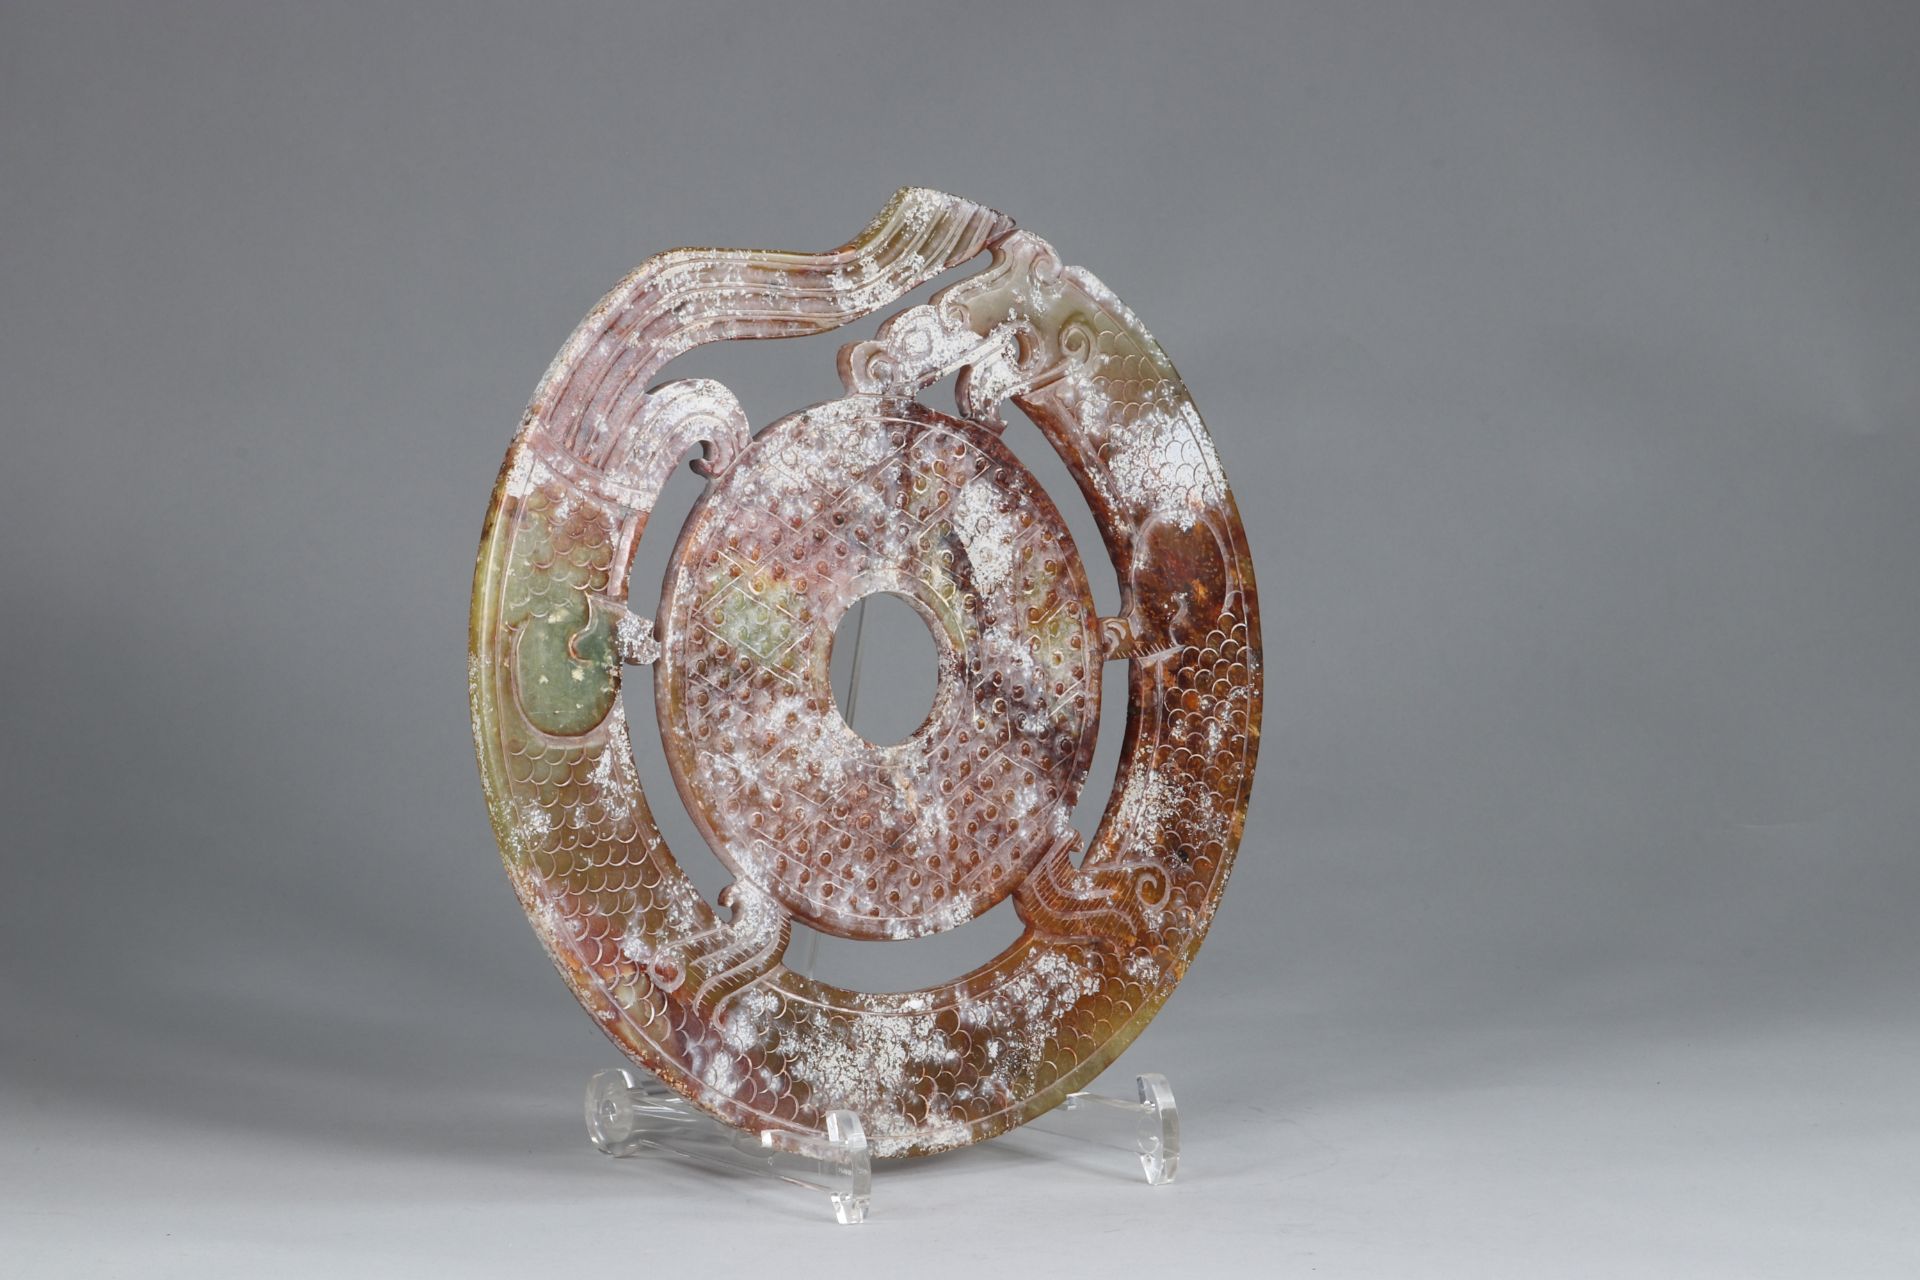 Archaic disc decorated with dragons - Image 3 of 3